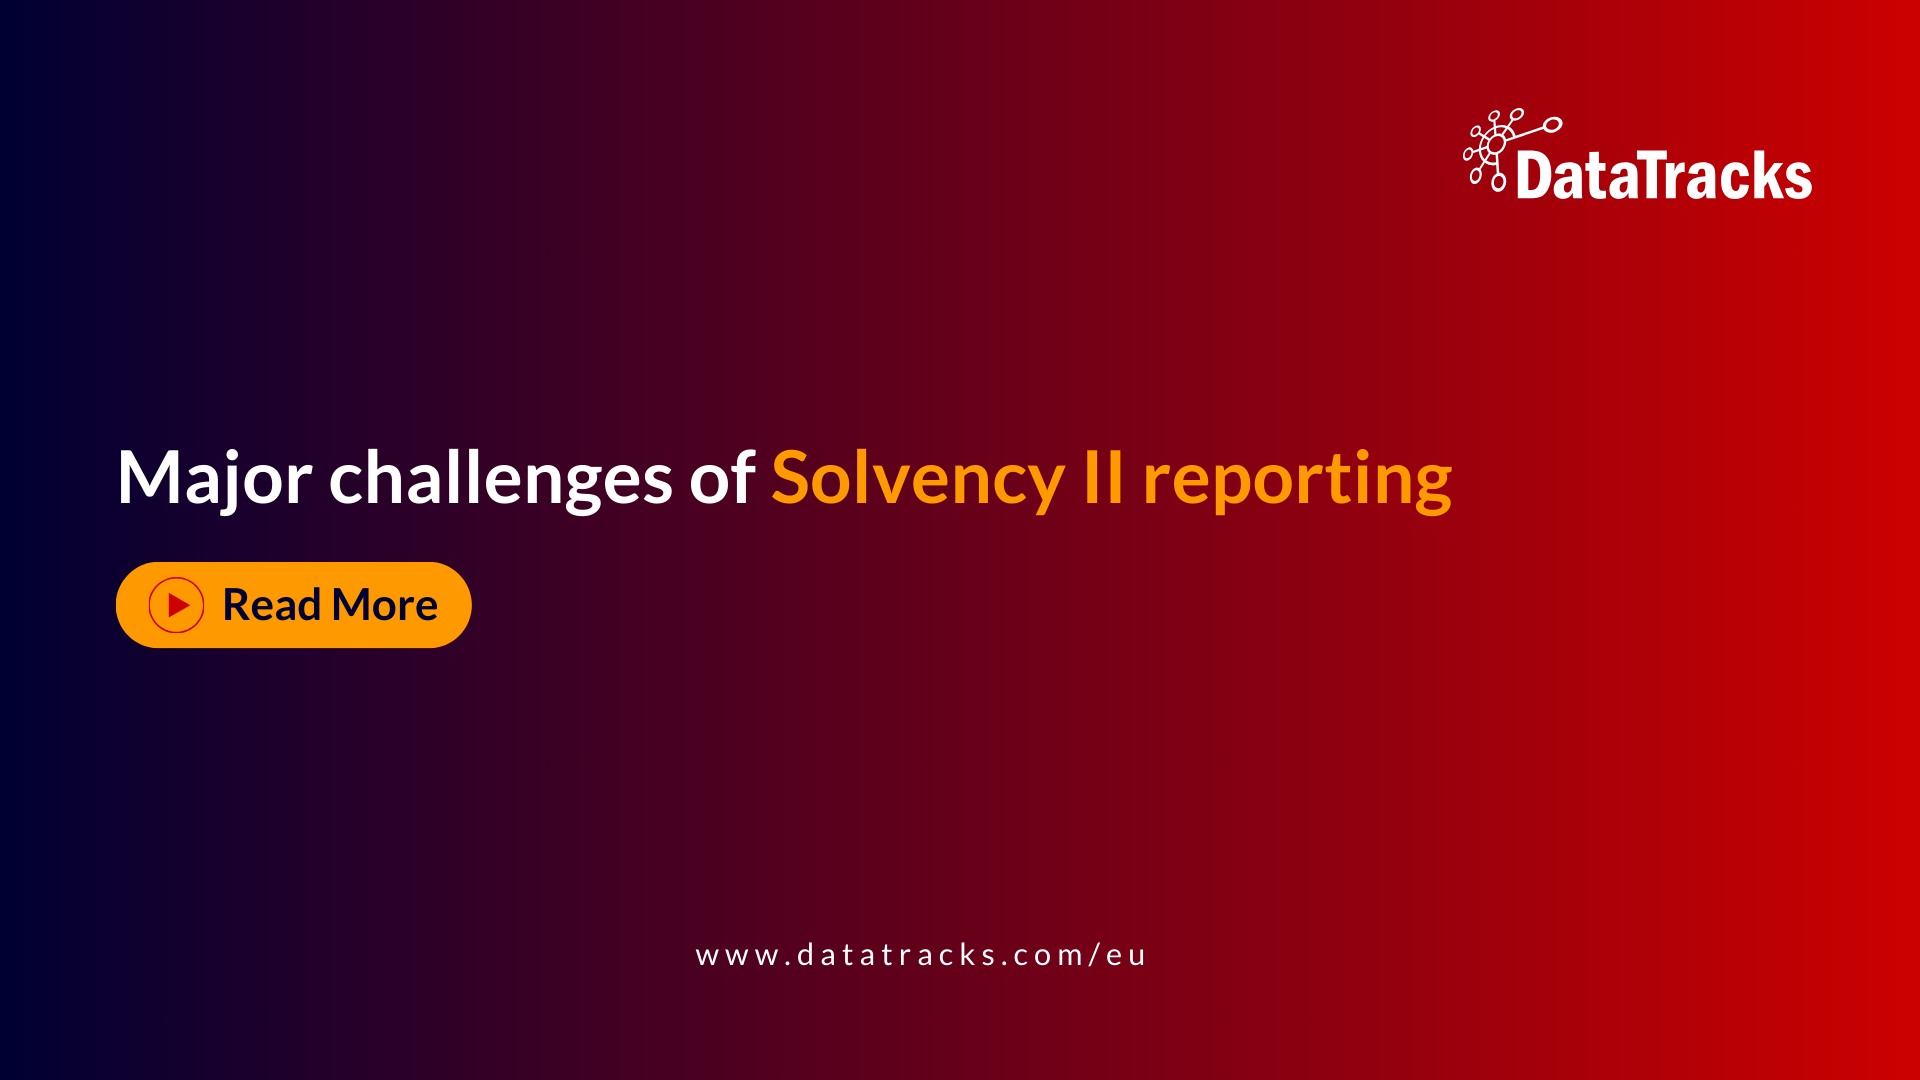 The challenges of Solvency II reporting